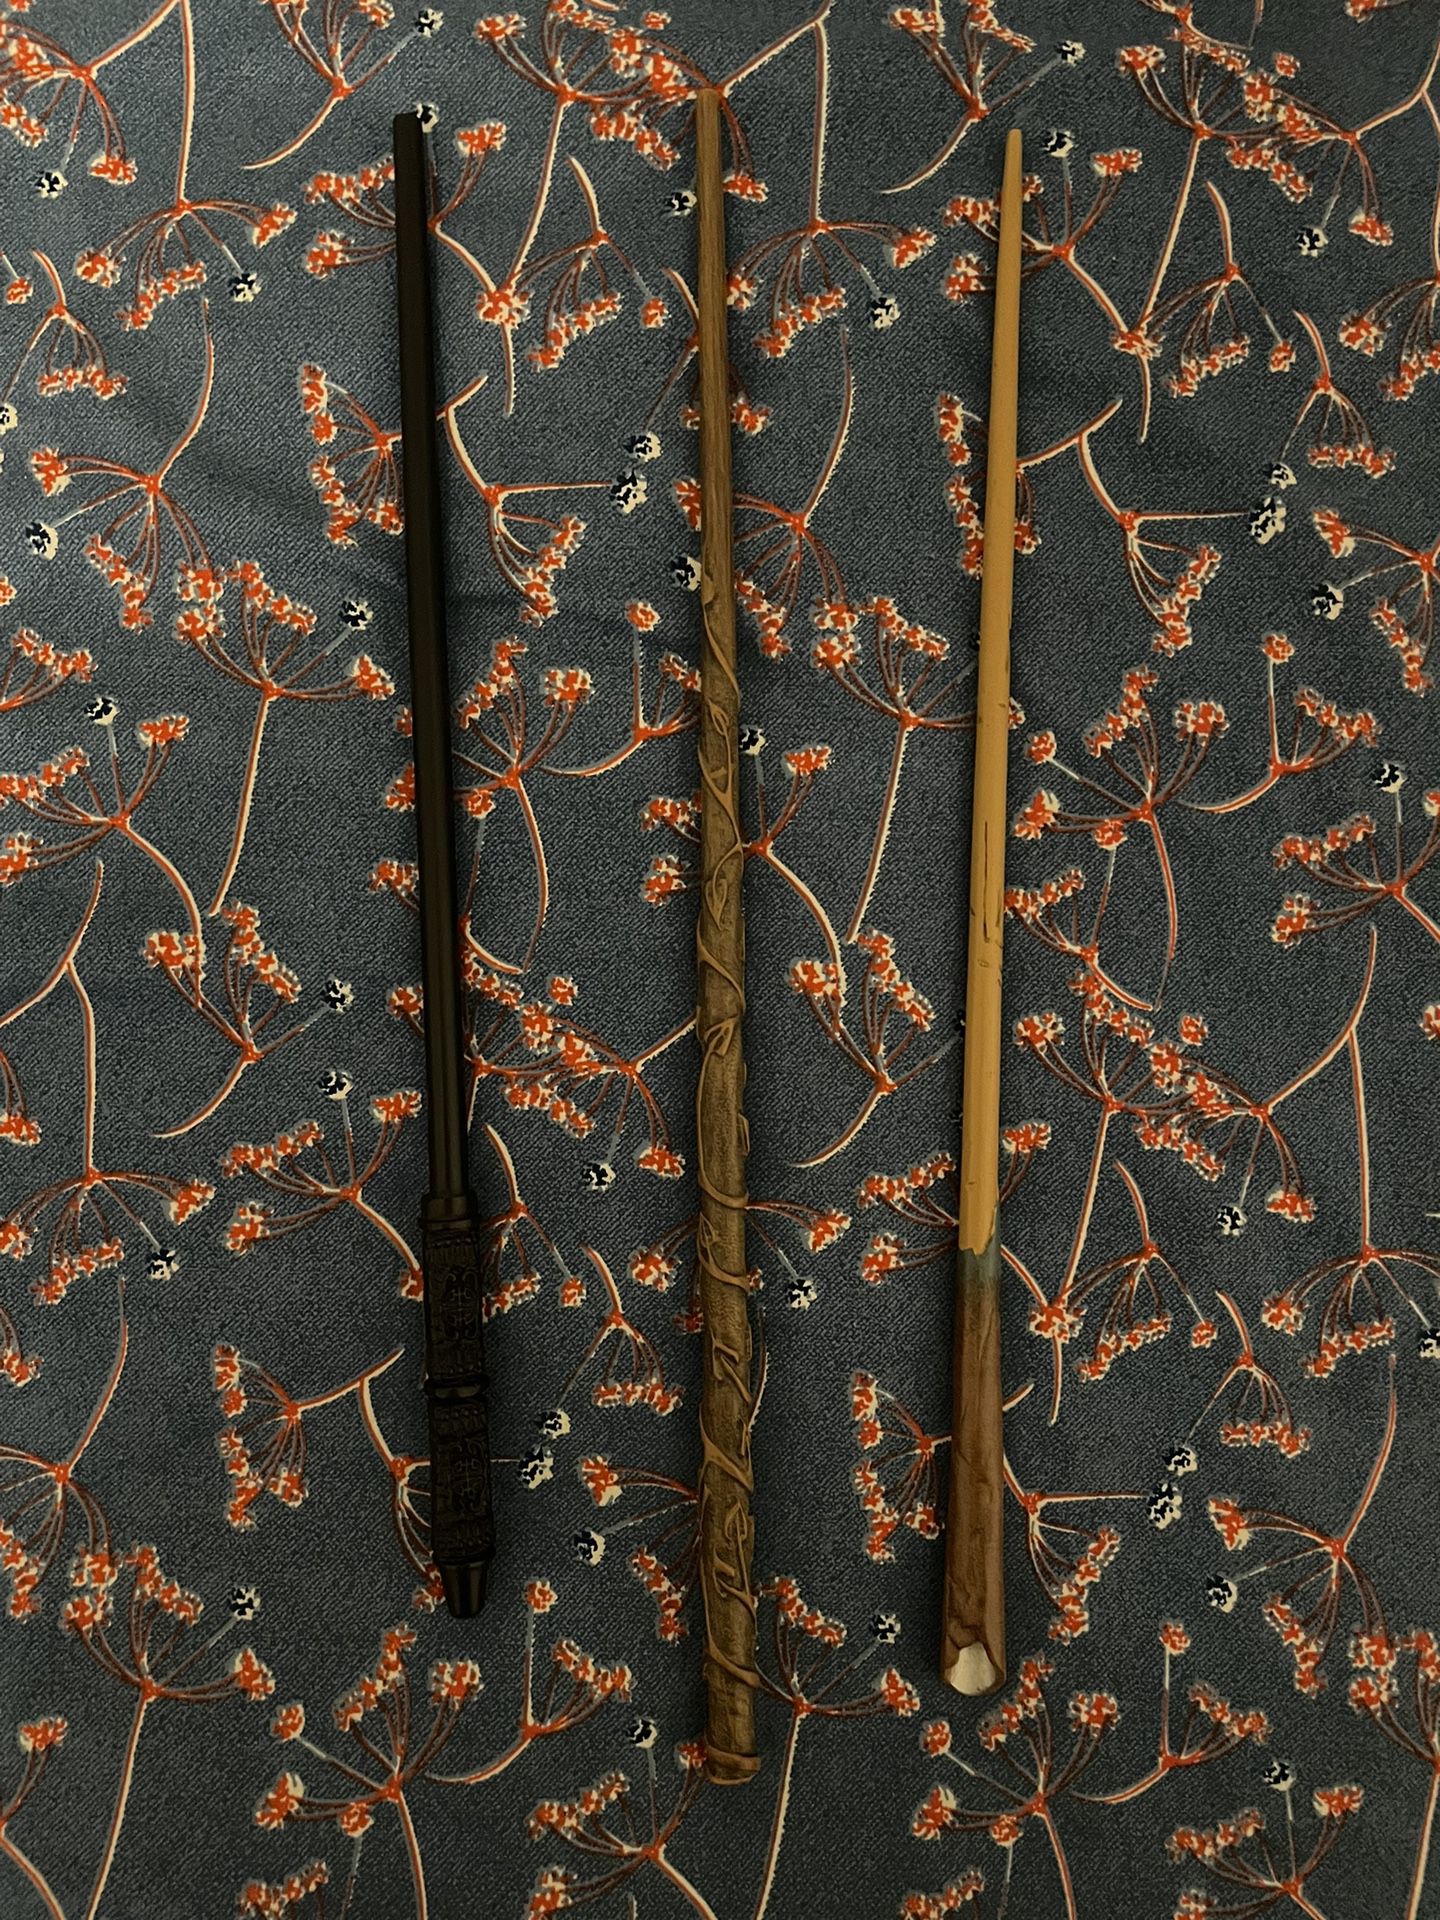 3 Noble Collection Harry Potter Wands